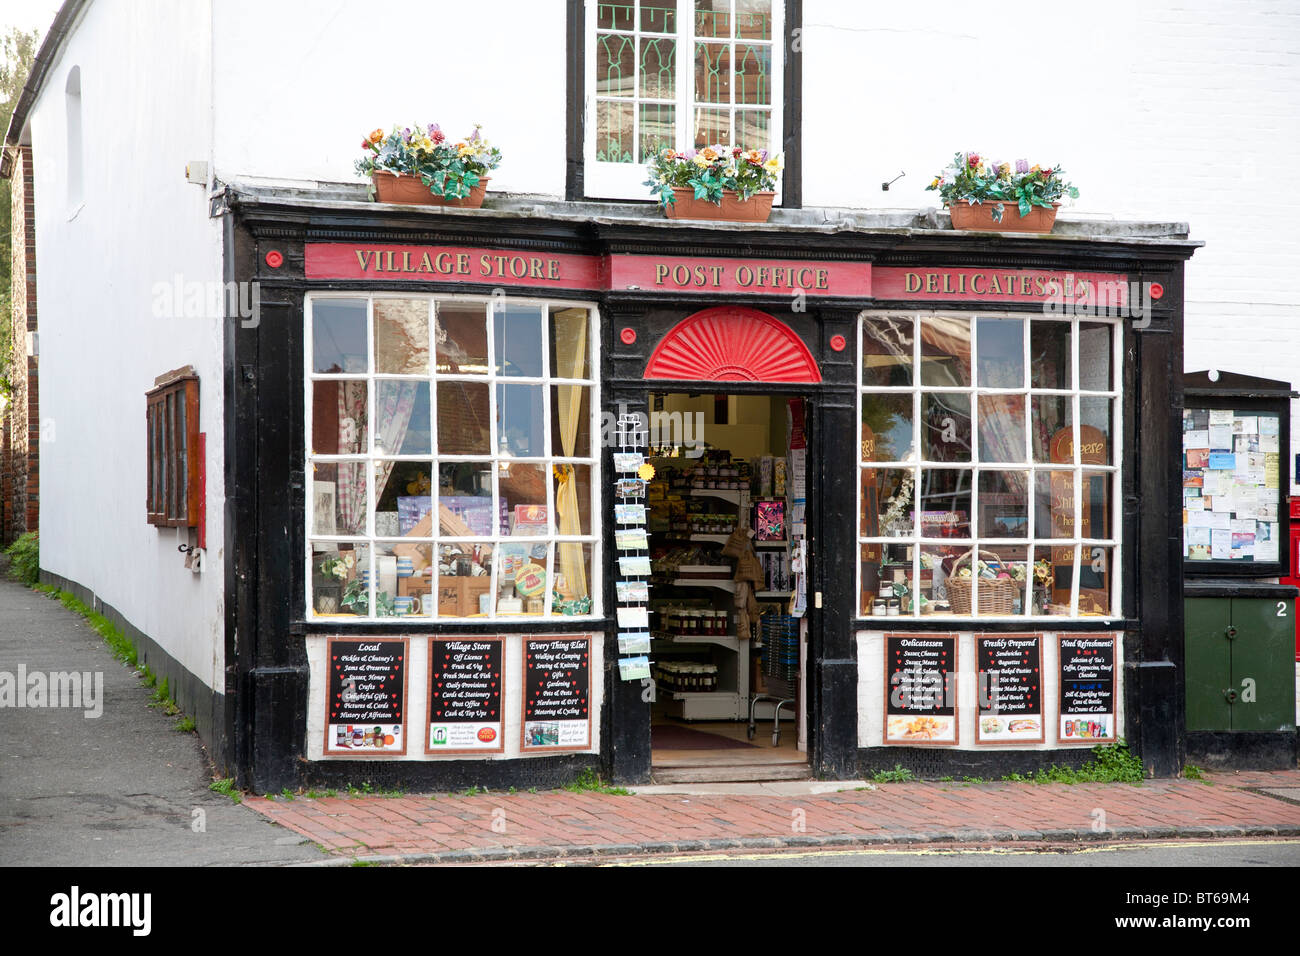 Facade of the Village Store and Post Office Alfriston, East Sussex Stock Photo